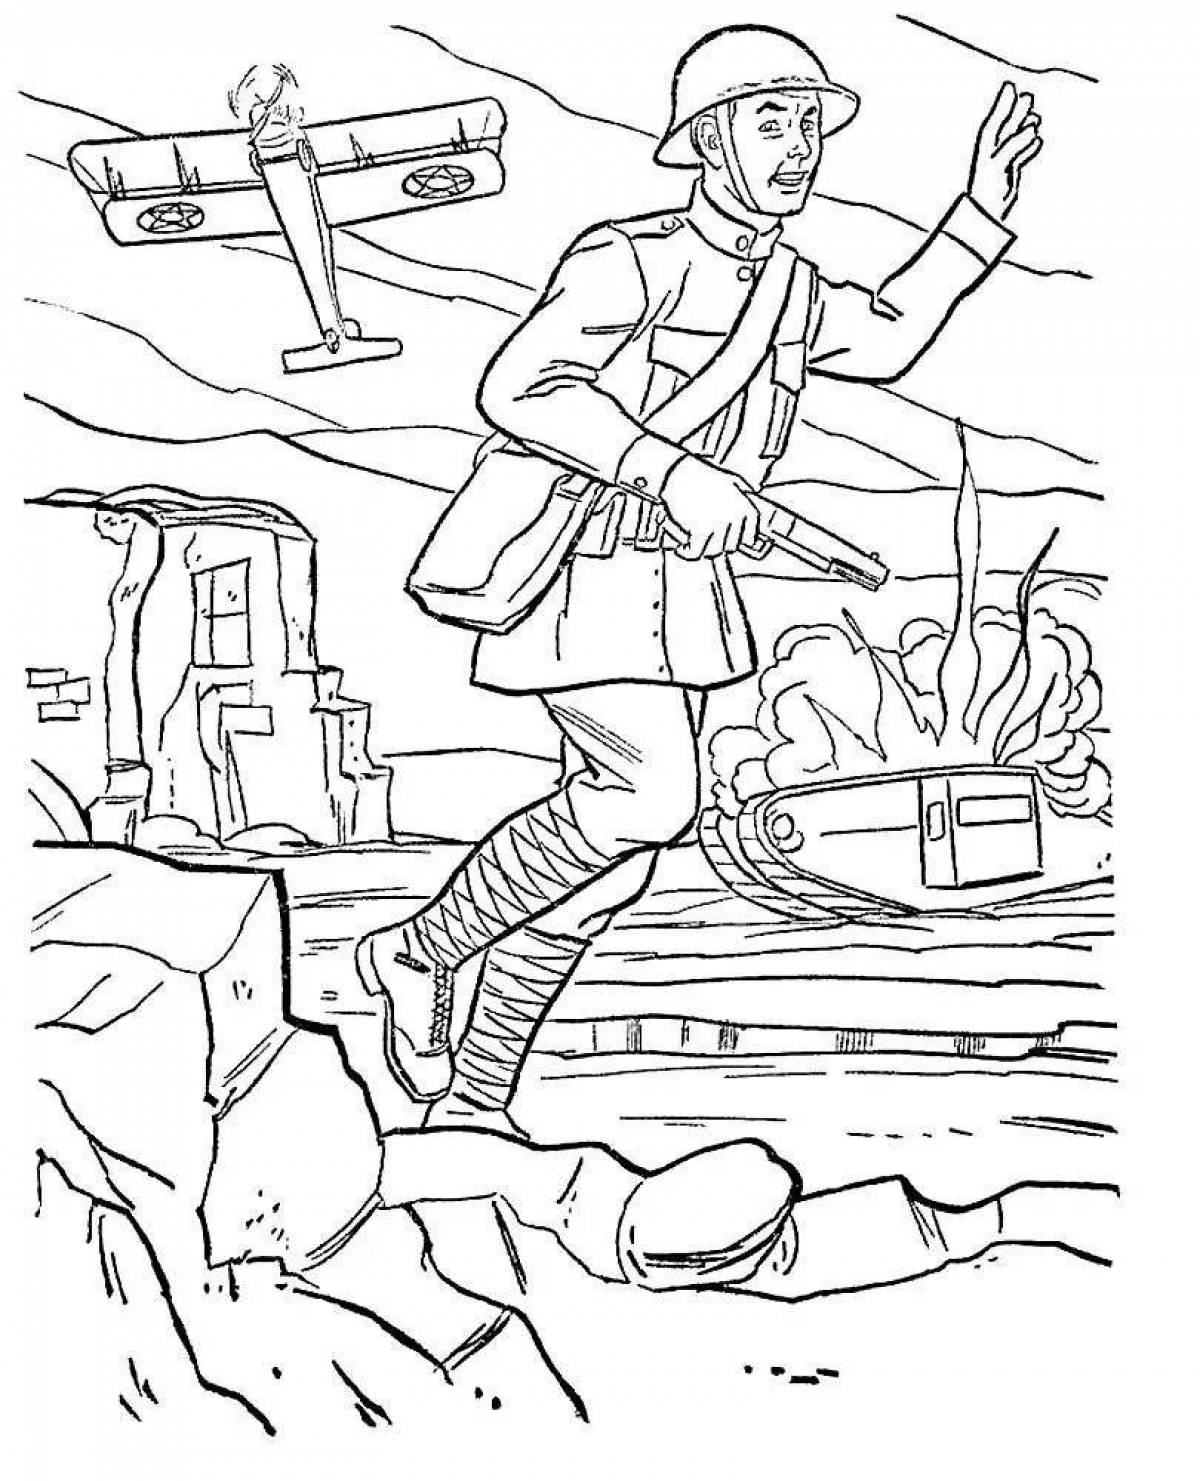 Coloring page energetic defender of the fatherland